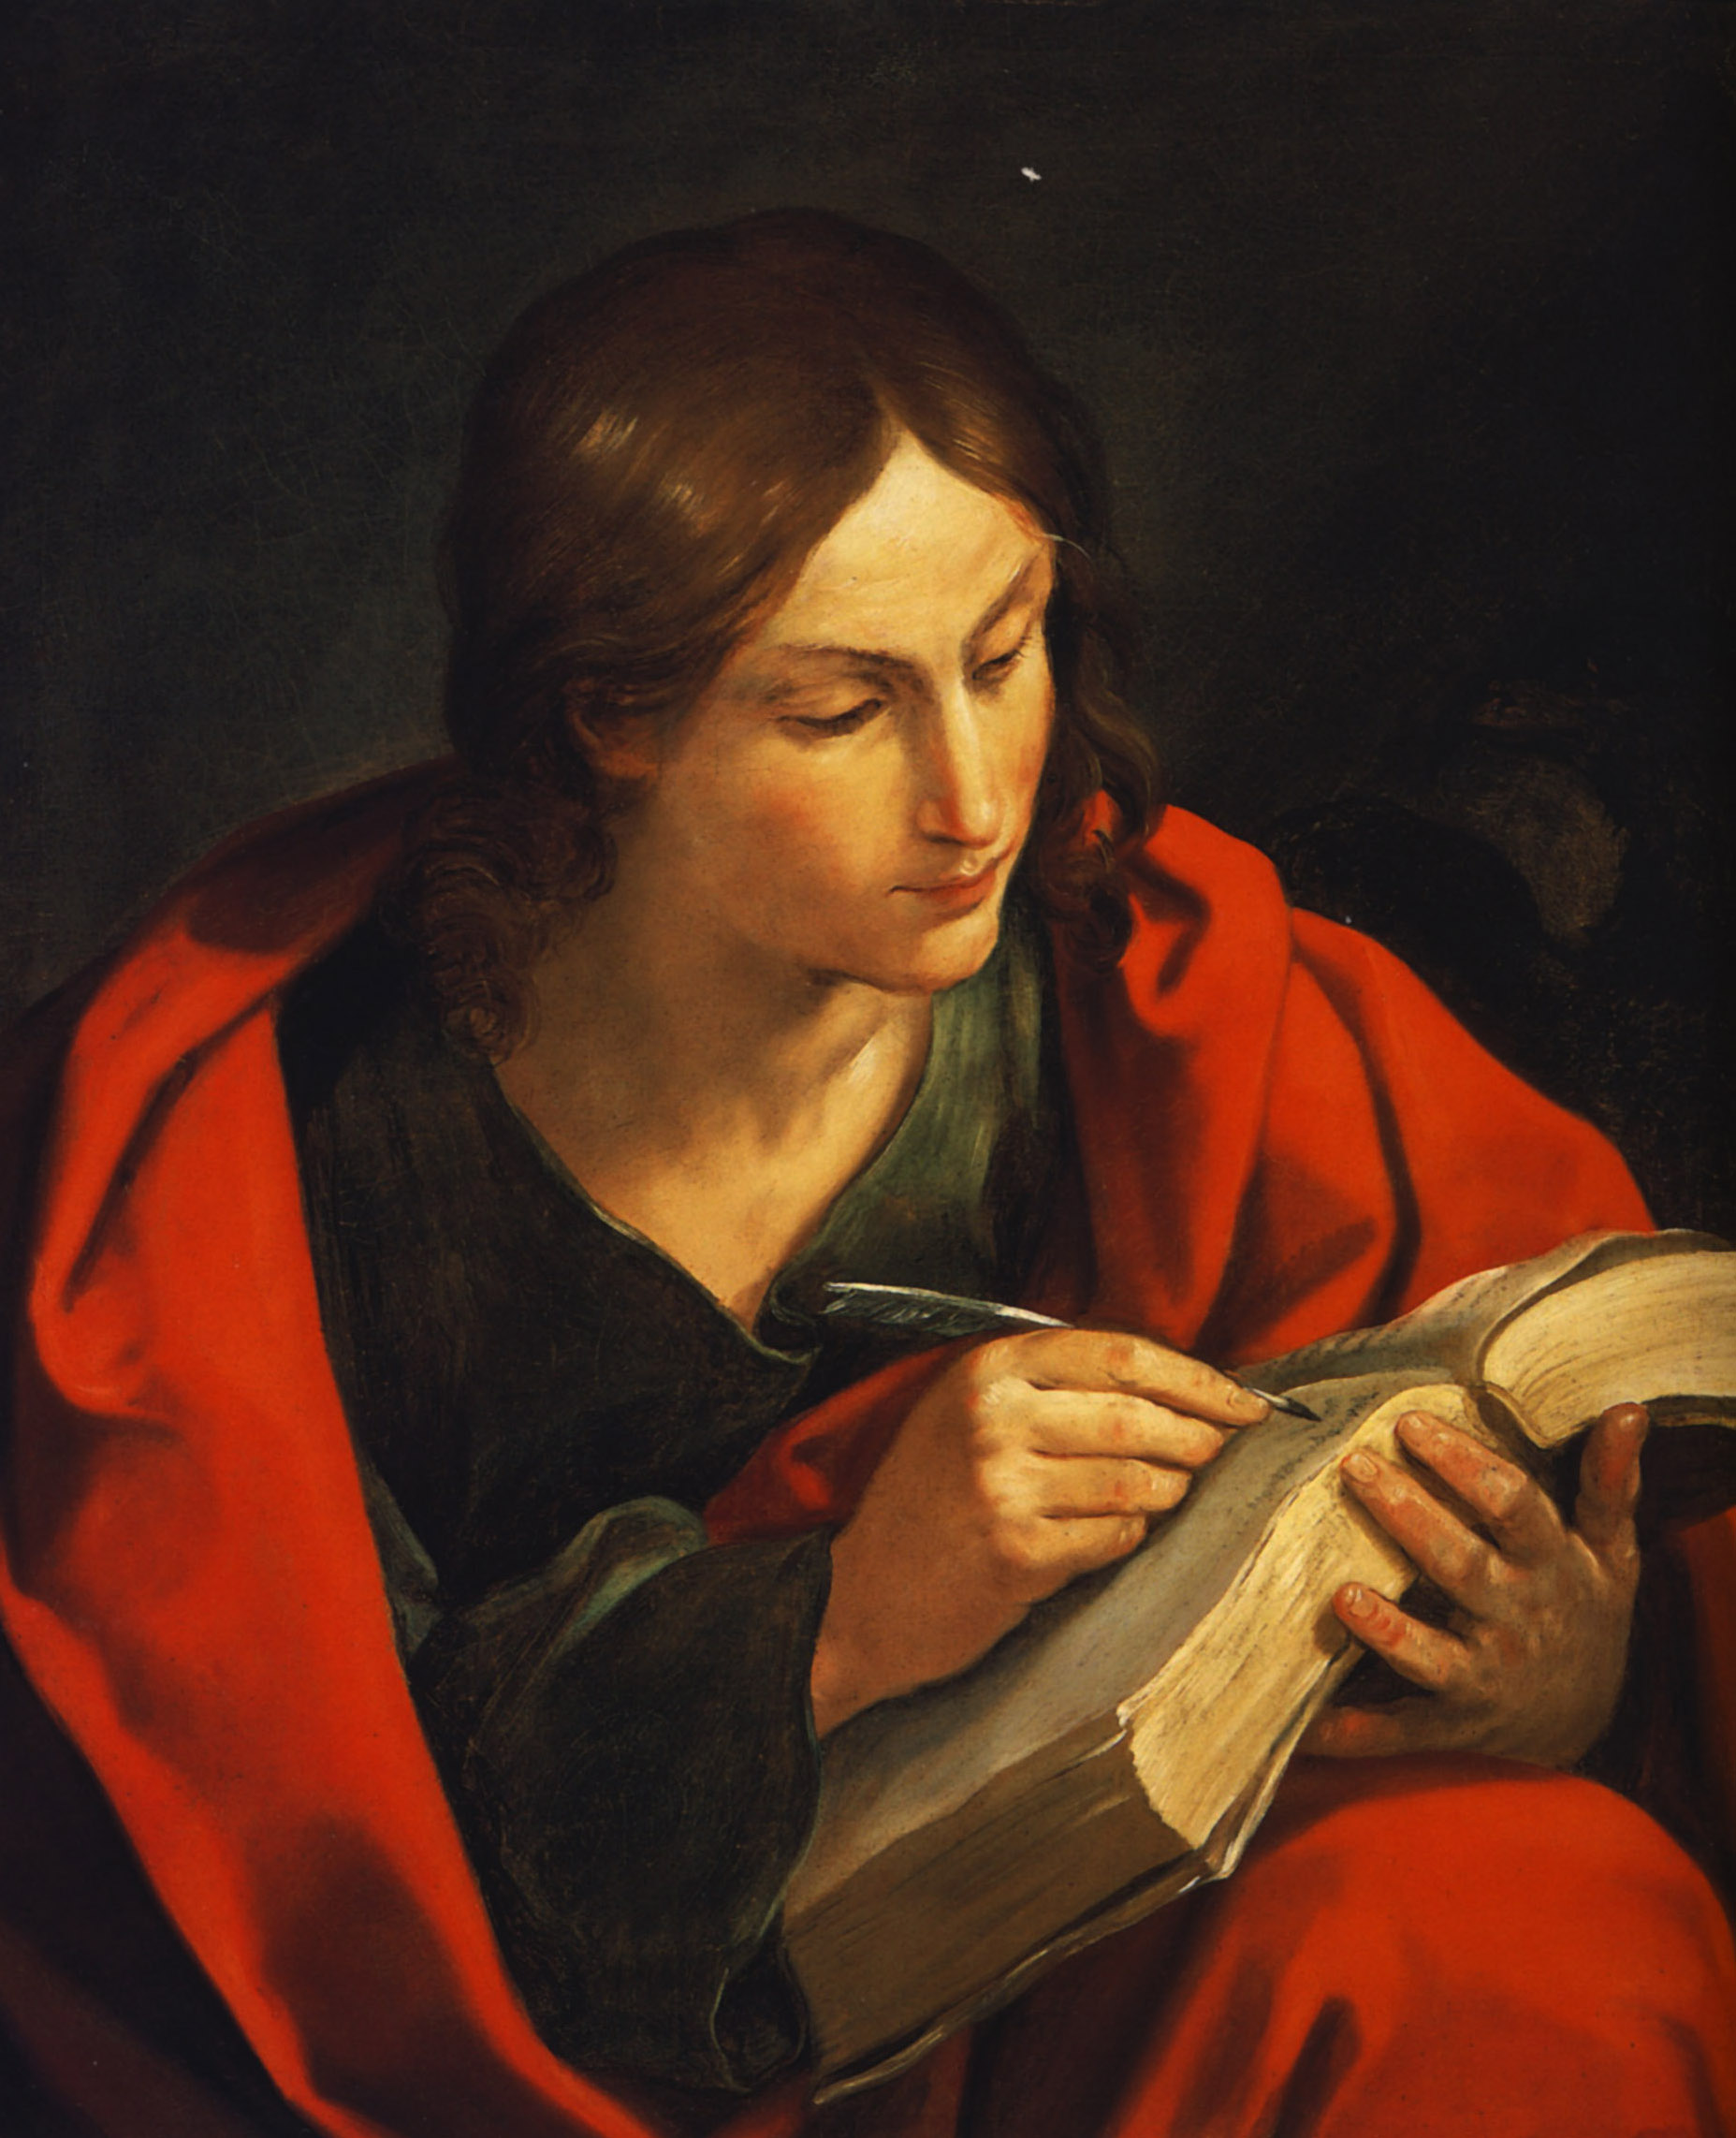 Today in Masonic History Feast of St. John the Evangelist